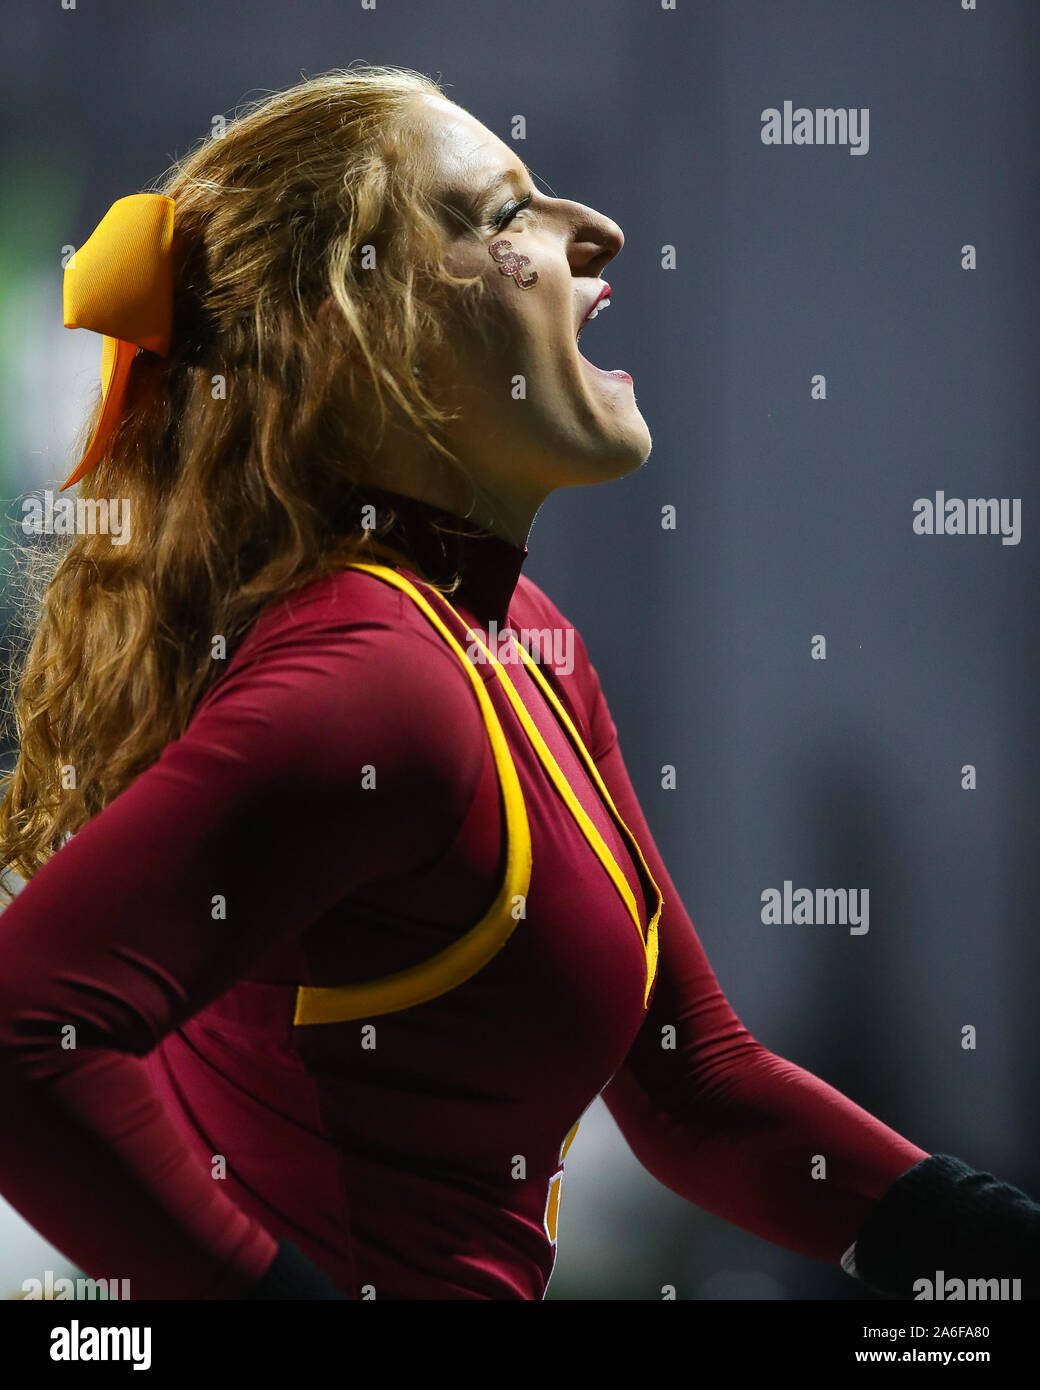 October 25, 2019: A USC cheerleader urges on some of her fans in the second half of the game between Colorado and USC at Folsom Field in Boulder, CO. USC rallied to win 35-31. Derek Regensburger/CSM. Credit: Cal Sport Media/Alamy Live News Credit: Cal Sport Media/Alamy Live News Credit: Cal Sport Media/Alamy Live News Stock Photo